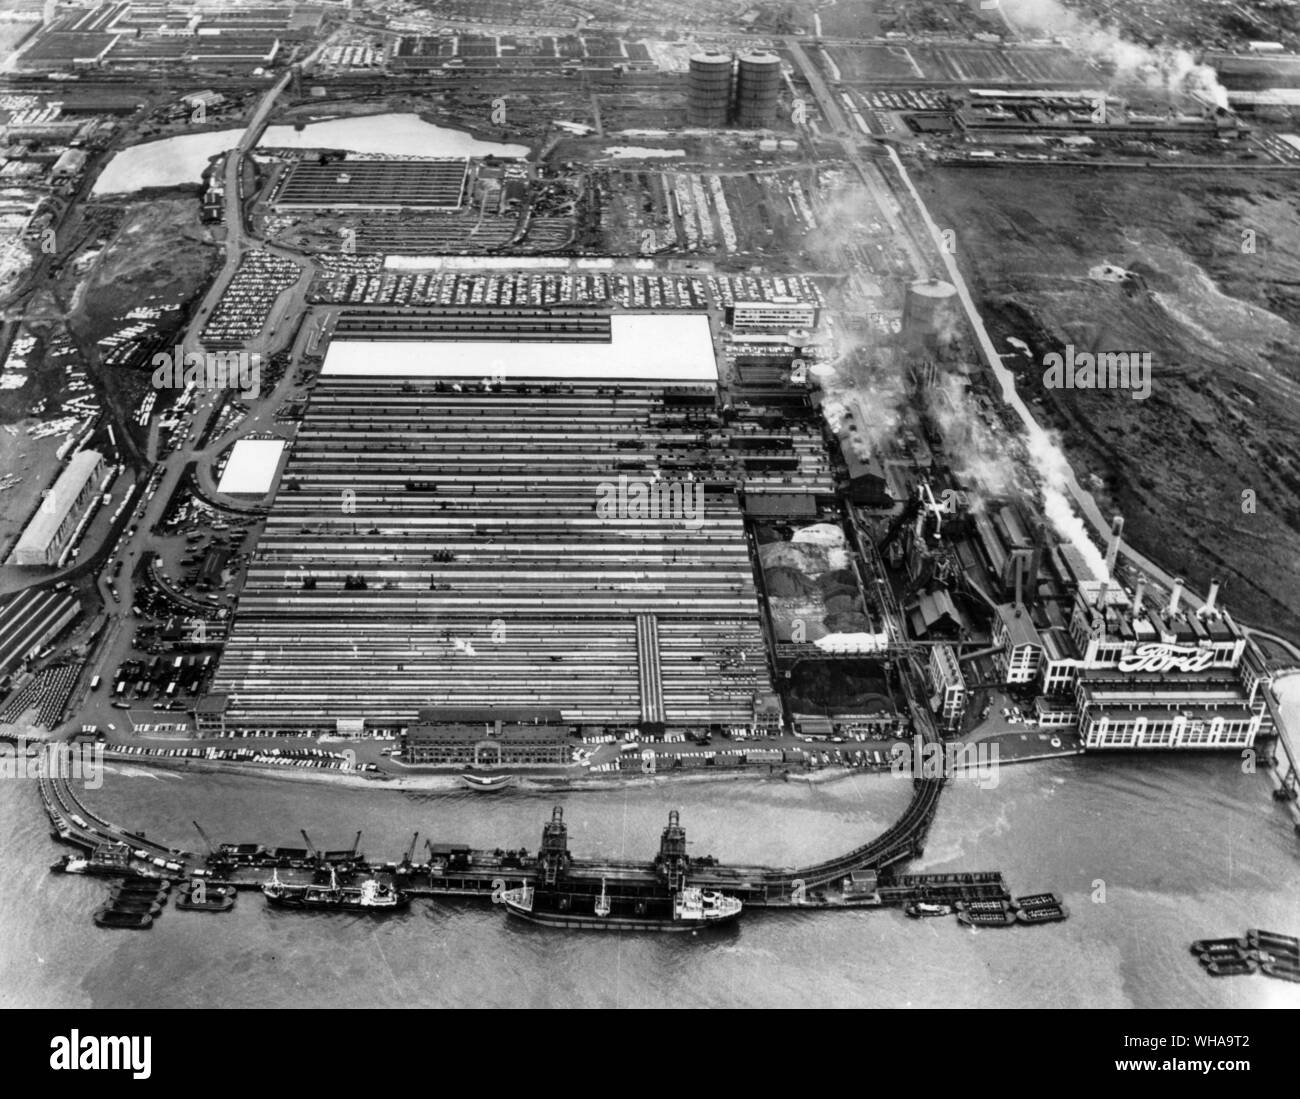 An above Thames view of the Ford engine plant at Dagenham where an £18 million expansion plan is announced today. Accommodating 2 and a quarter million sq ft of floor space under one roof, it is to incorporate 300.000 sq ft of new buildings, shown as an L shape white section at the top of the picture, and the white square at left which represents a computer controlled warehouse for the storage of components and assemblies. 19th June 1969. Stock Photo